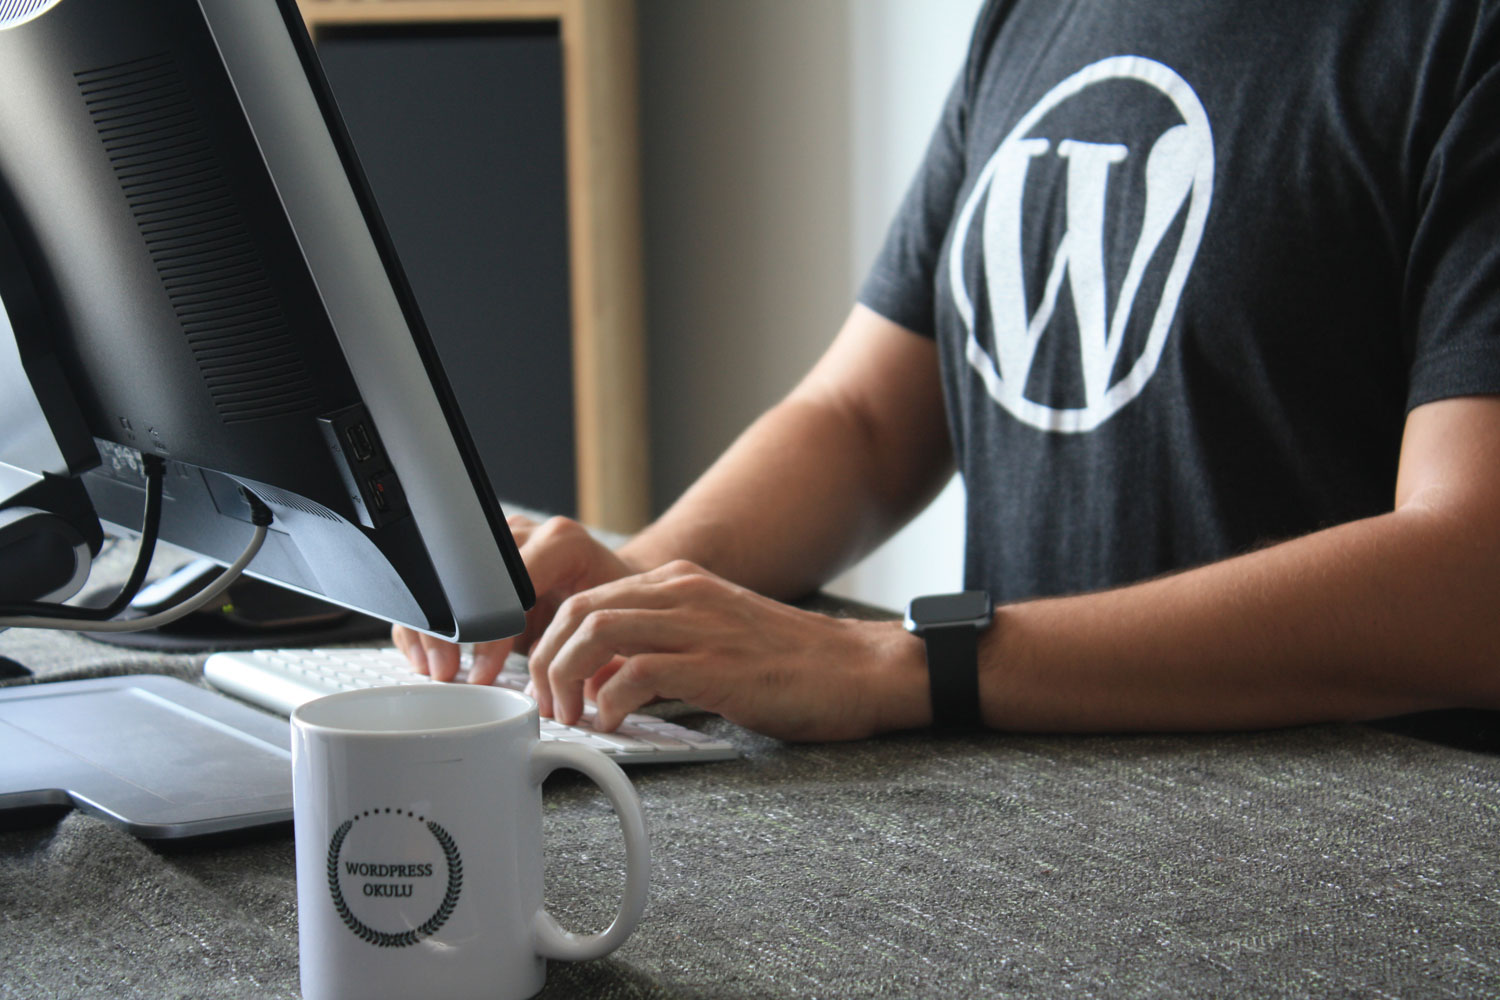 WordPress vs. other website builders: Which is the better platform for website design and development?